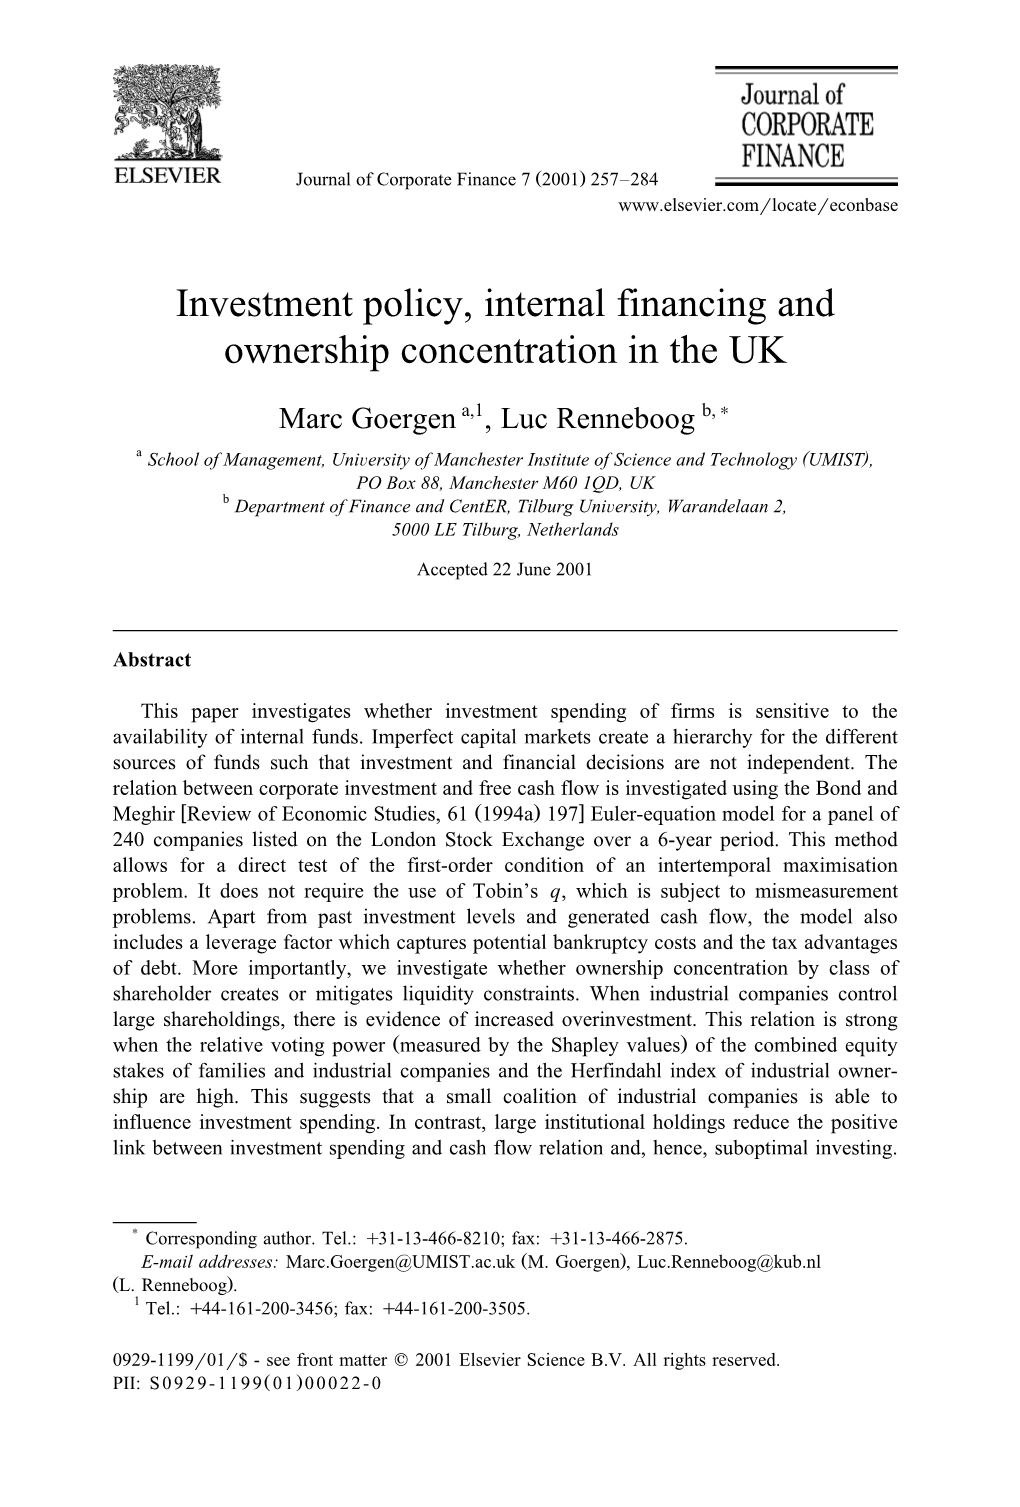 Investment Policy, Internal Financing and Ownership Concentration in the UK